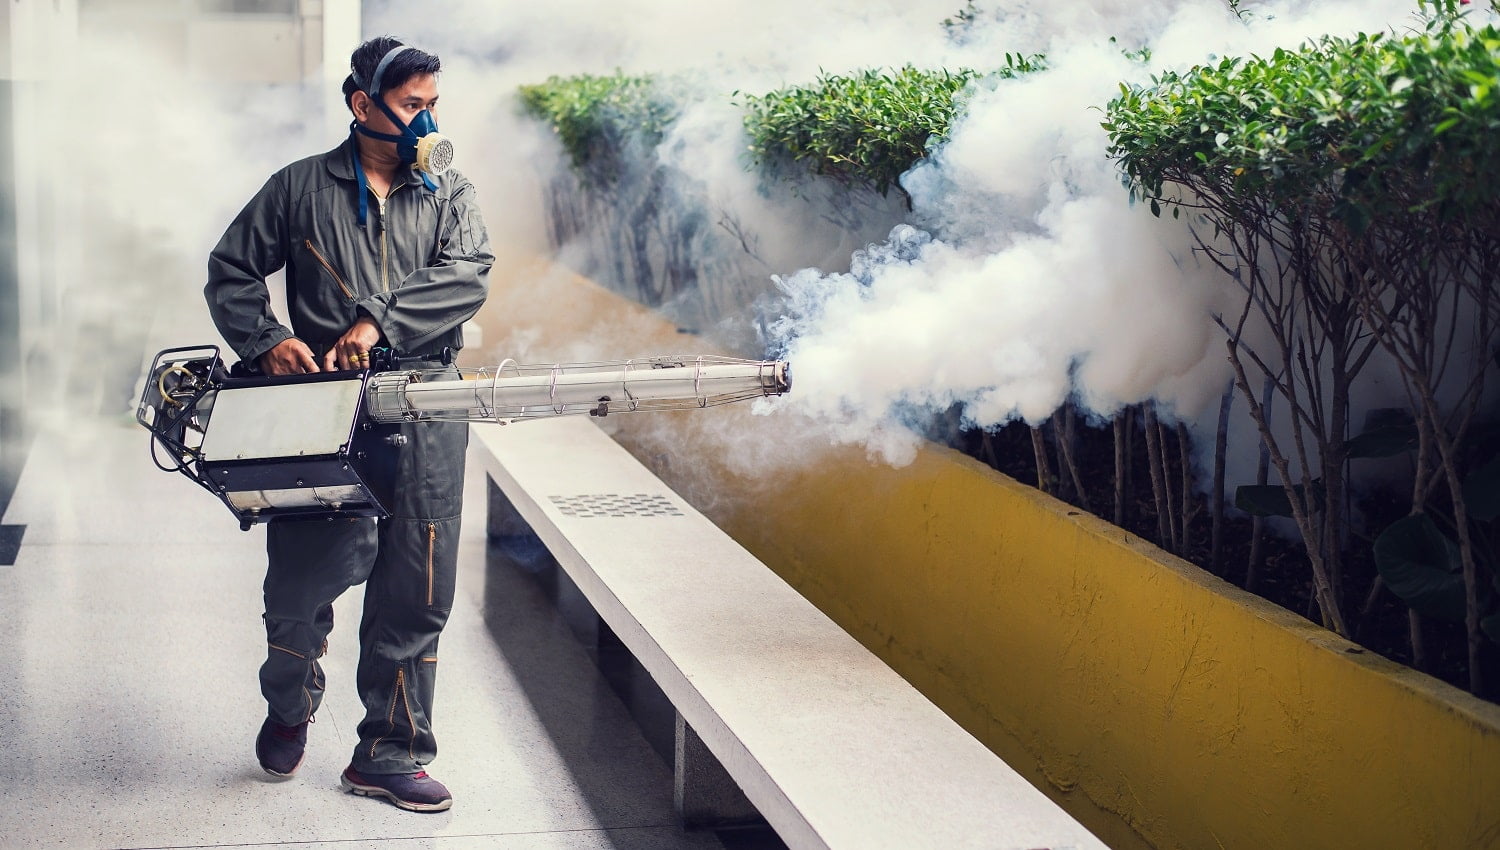 The man's fogging to eliminate mosquito for preventing spread dengue fever and zika virus